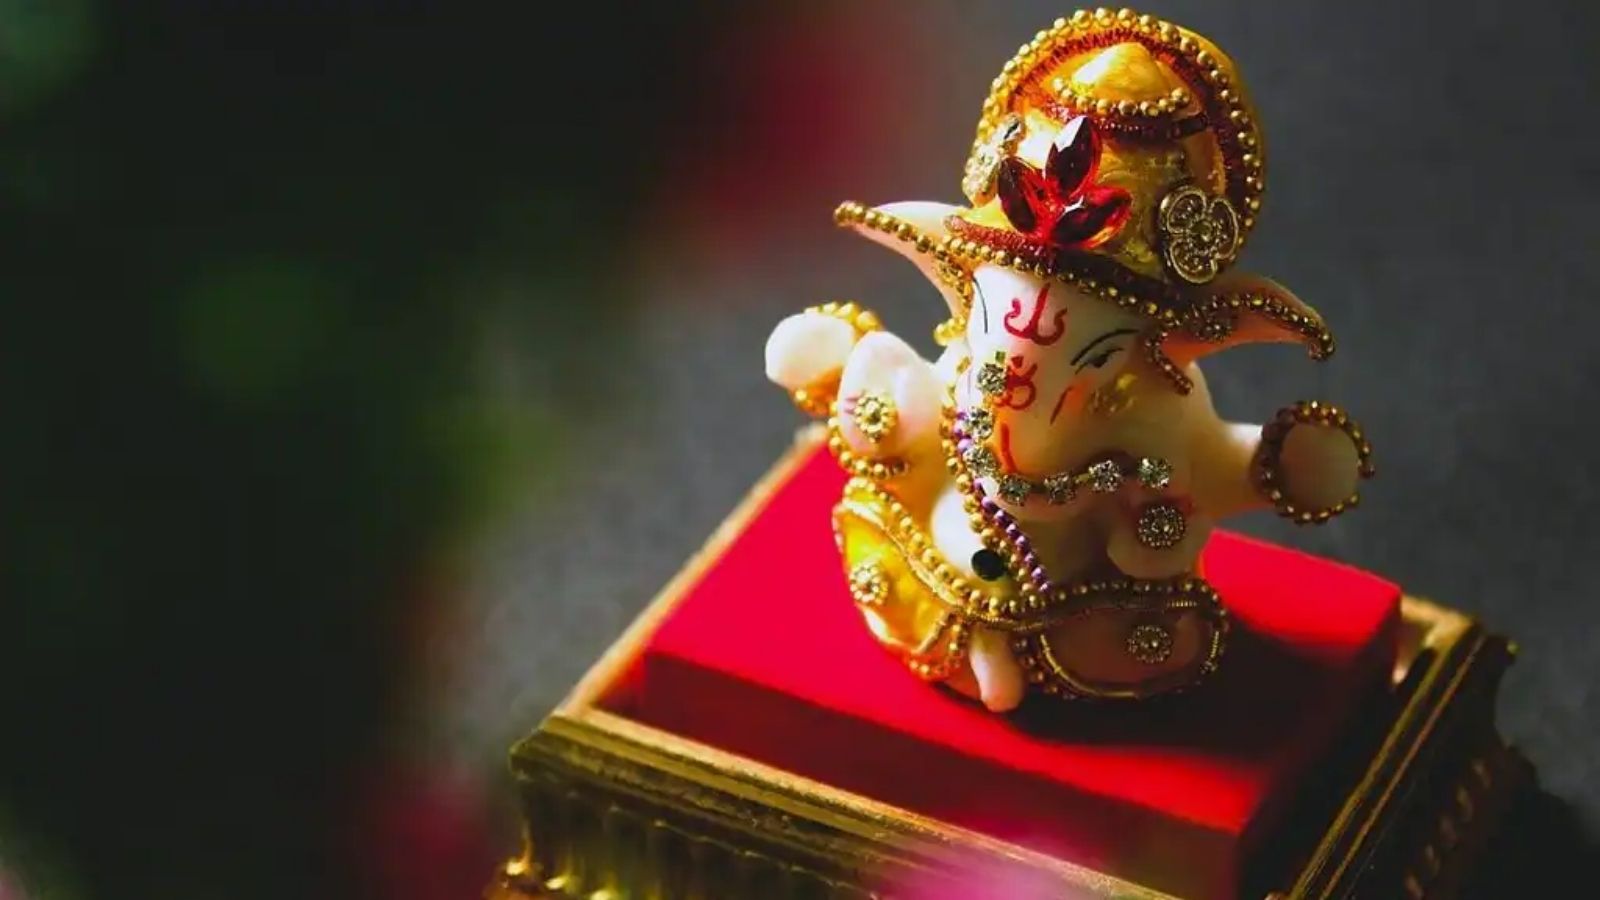 Ganesh Chaturthi is usually celebrated in large numbers in Maharashtra, Gujarat and Uttar Pradesh in western and central India